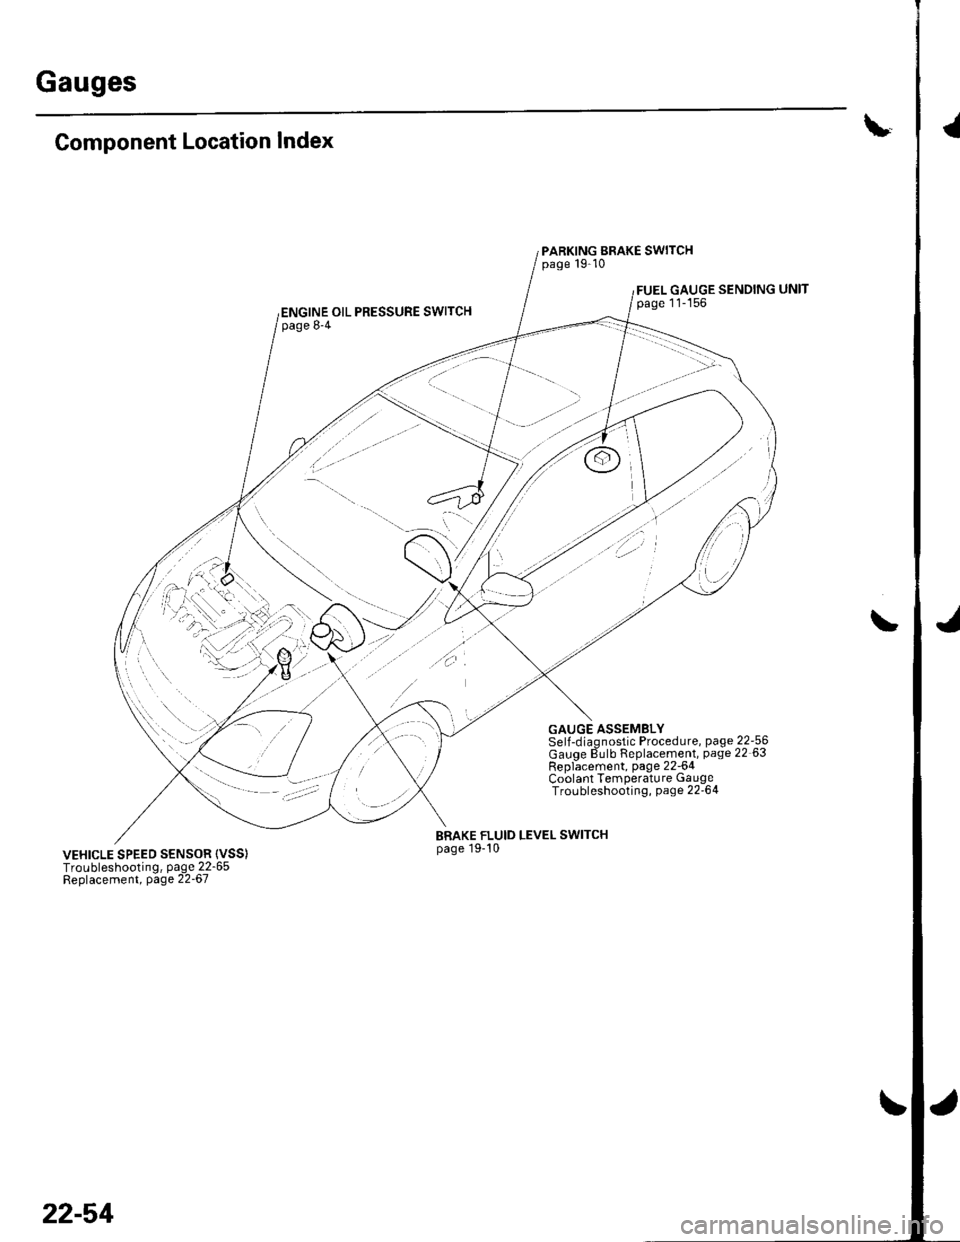 HONDA CIVIC 2003 7.G Owners Manual Gauges
\-Component Location Index
PARKING BRAKE SWITCHpage 19-10
FUEL GAUGE SENDINGpage 11-156ENGINE OIL PRESSURE SWITCHpage 8-4
GAUGE ASSEMBLYSelJ-diaqnostic Procedure, page 22-56Gauqe dulb Replaceme